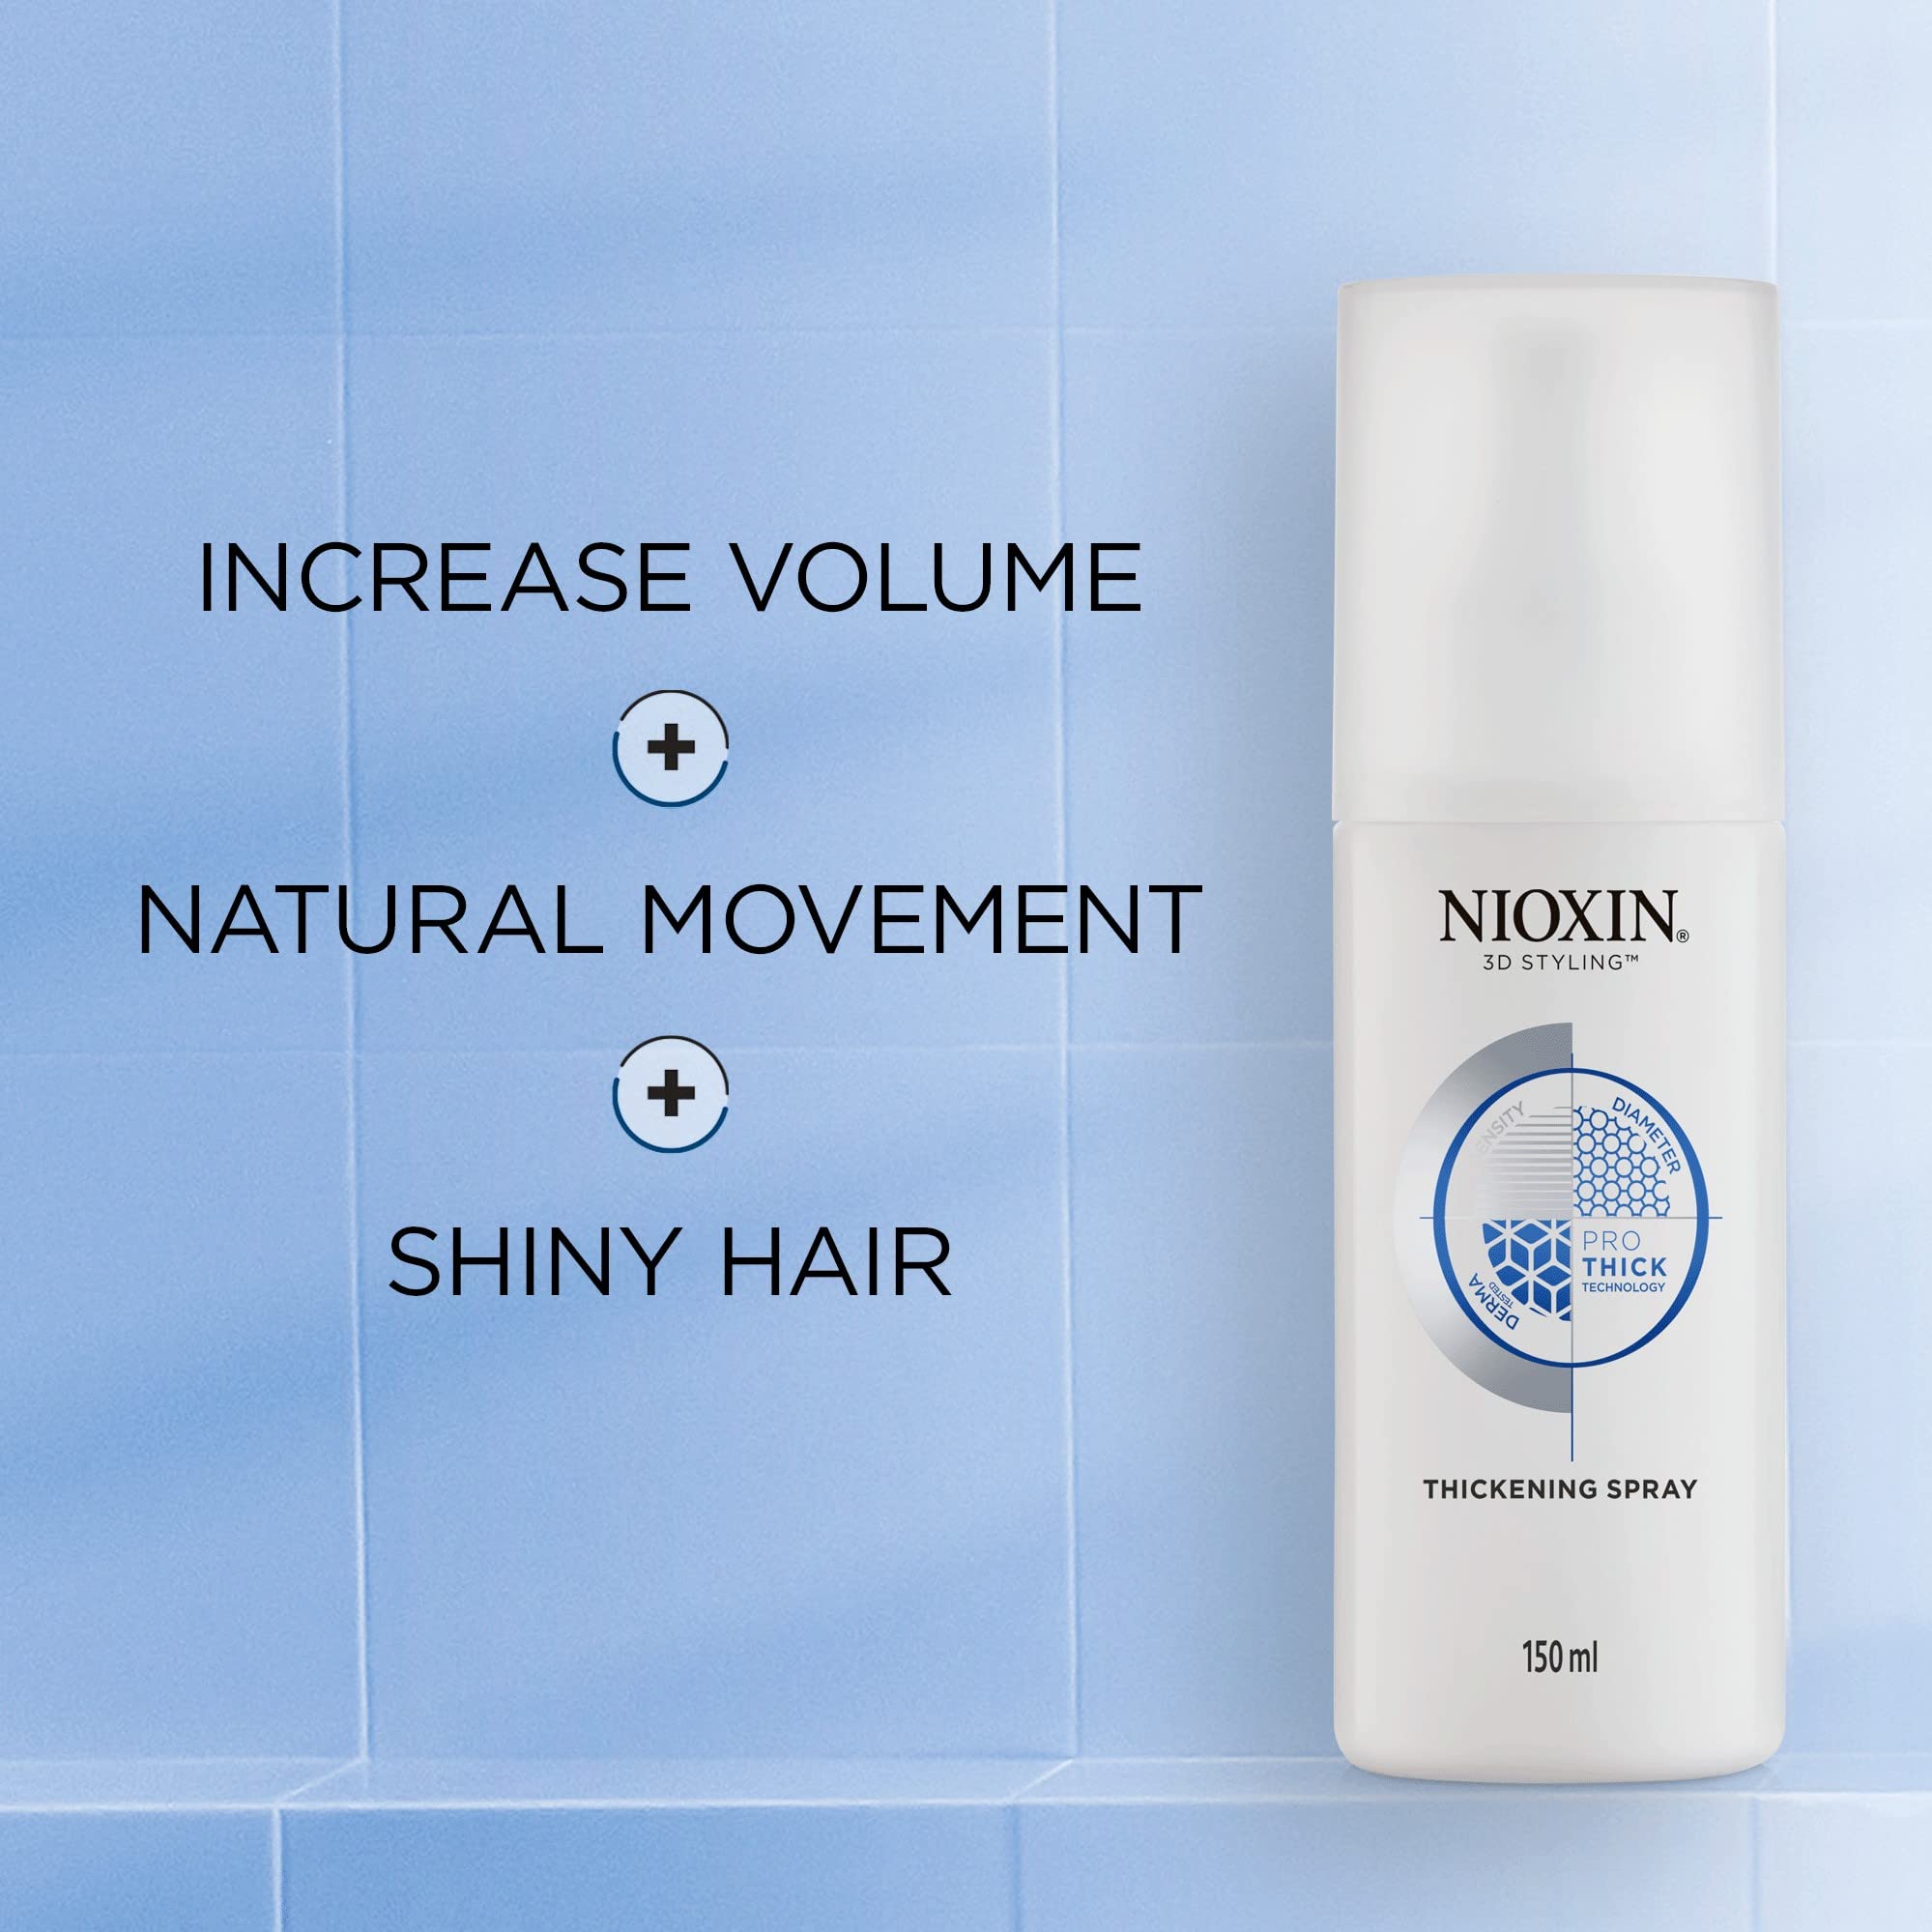 Nioxin Thickening Spray, 3D Styling Hairspray With ProThick Technology, Adds Volume and Texture for Thinning Hair, 5.1 oz